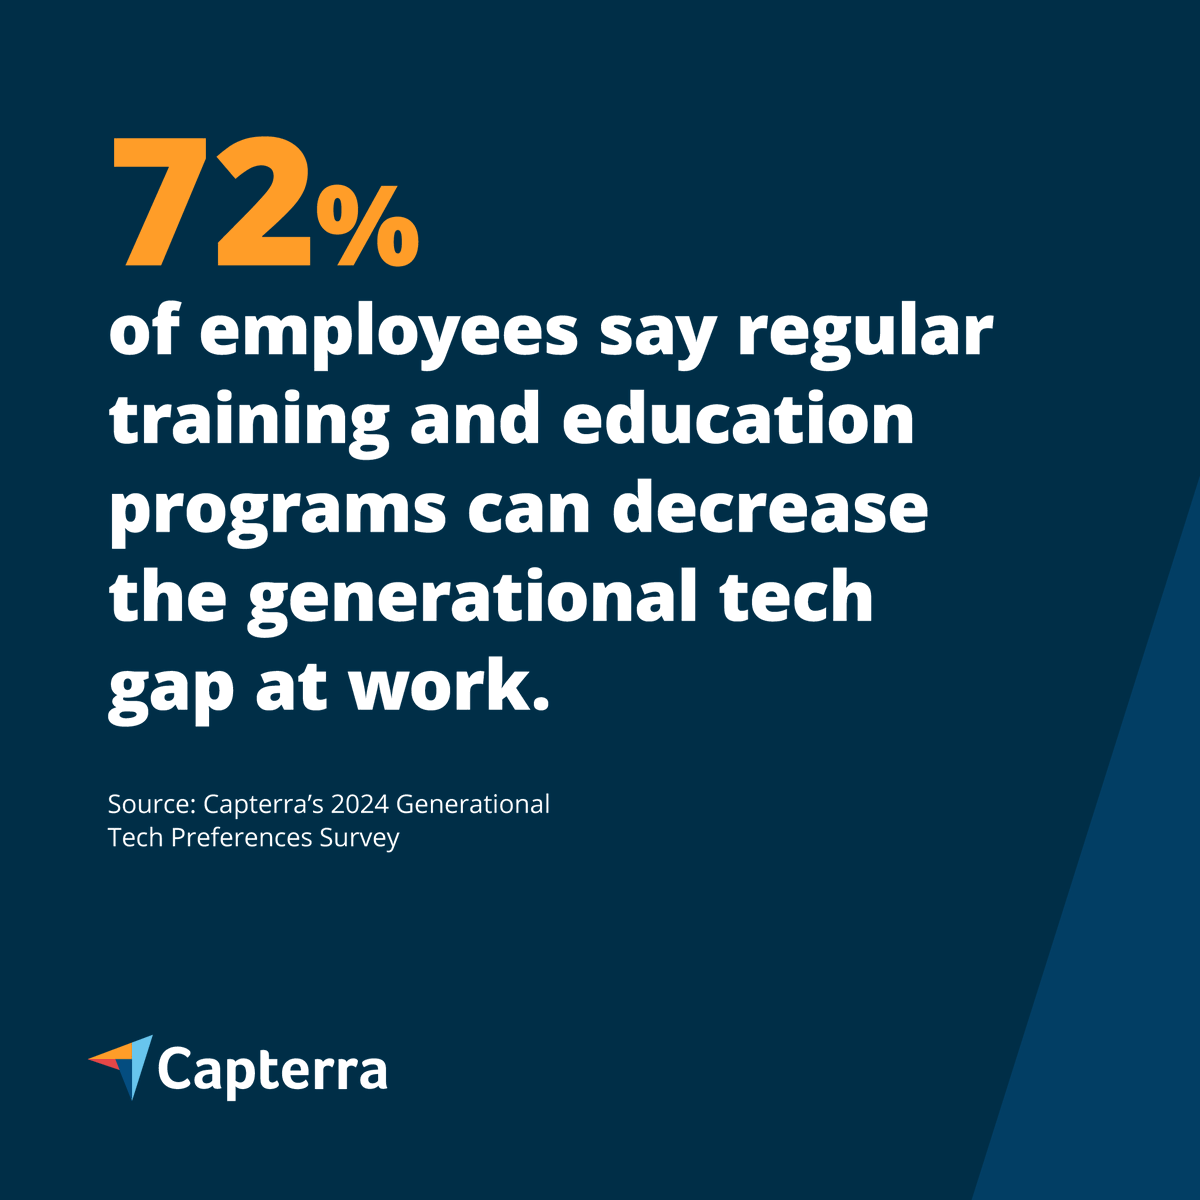 Many companies are adapting to the generational tech gap with training and IT support. What types of programs has your business implemented to help bridge this gap? #GenerationalGap #Tech